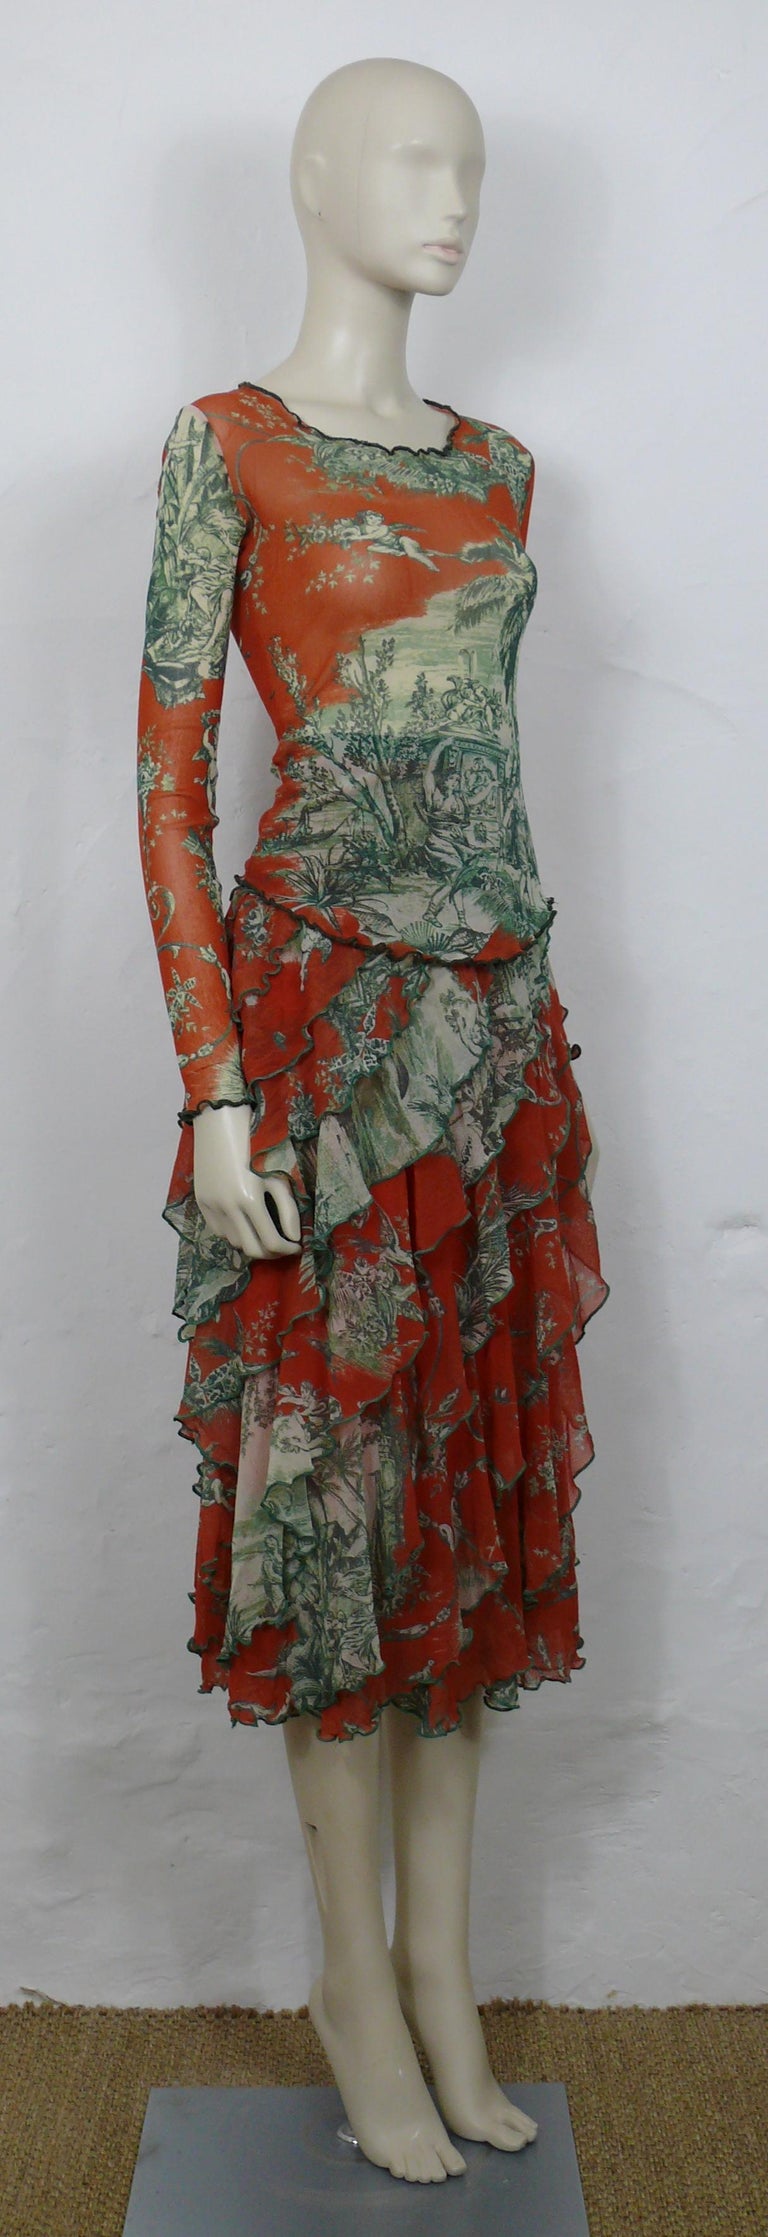 JEAN PAUL GAULTIER FUZZI mesh Toile de Jouy print ensemble including a top and a skirt.

TOP features :
- FUZZI sheer mesh with a green Toile de Jouy print on a coral color background.
- Long sleeves.
- Slips on.
- No lining.
- Size label reads :